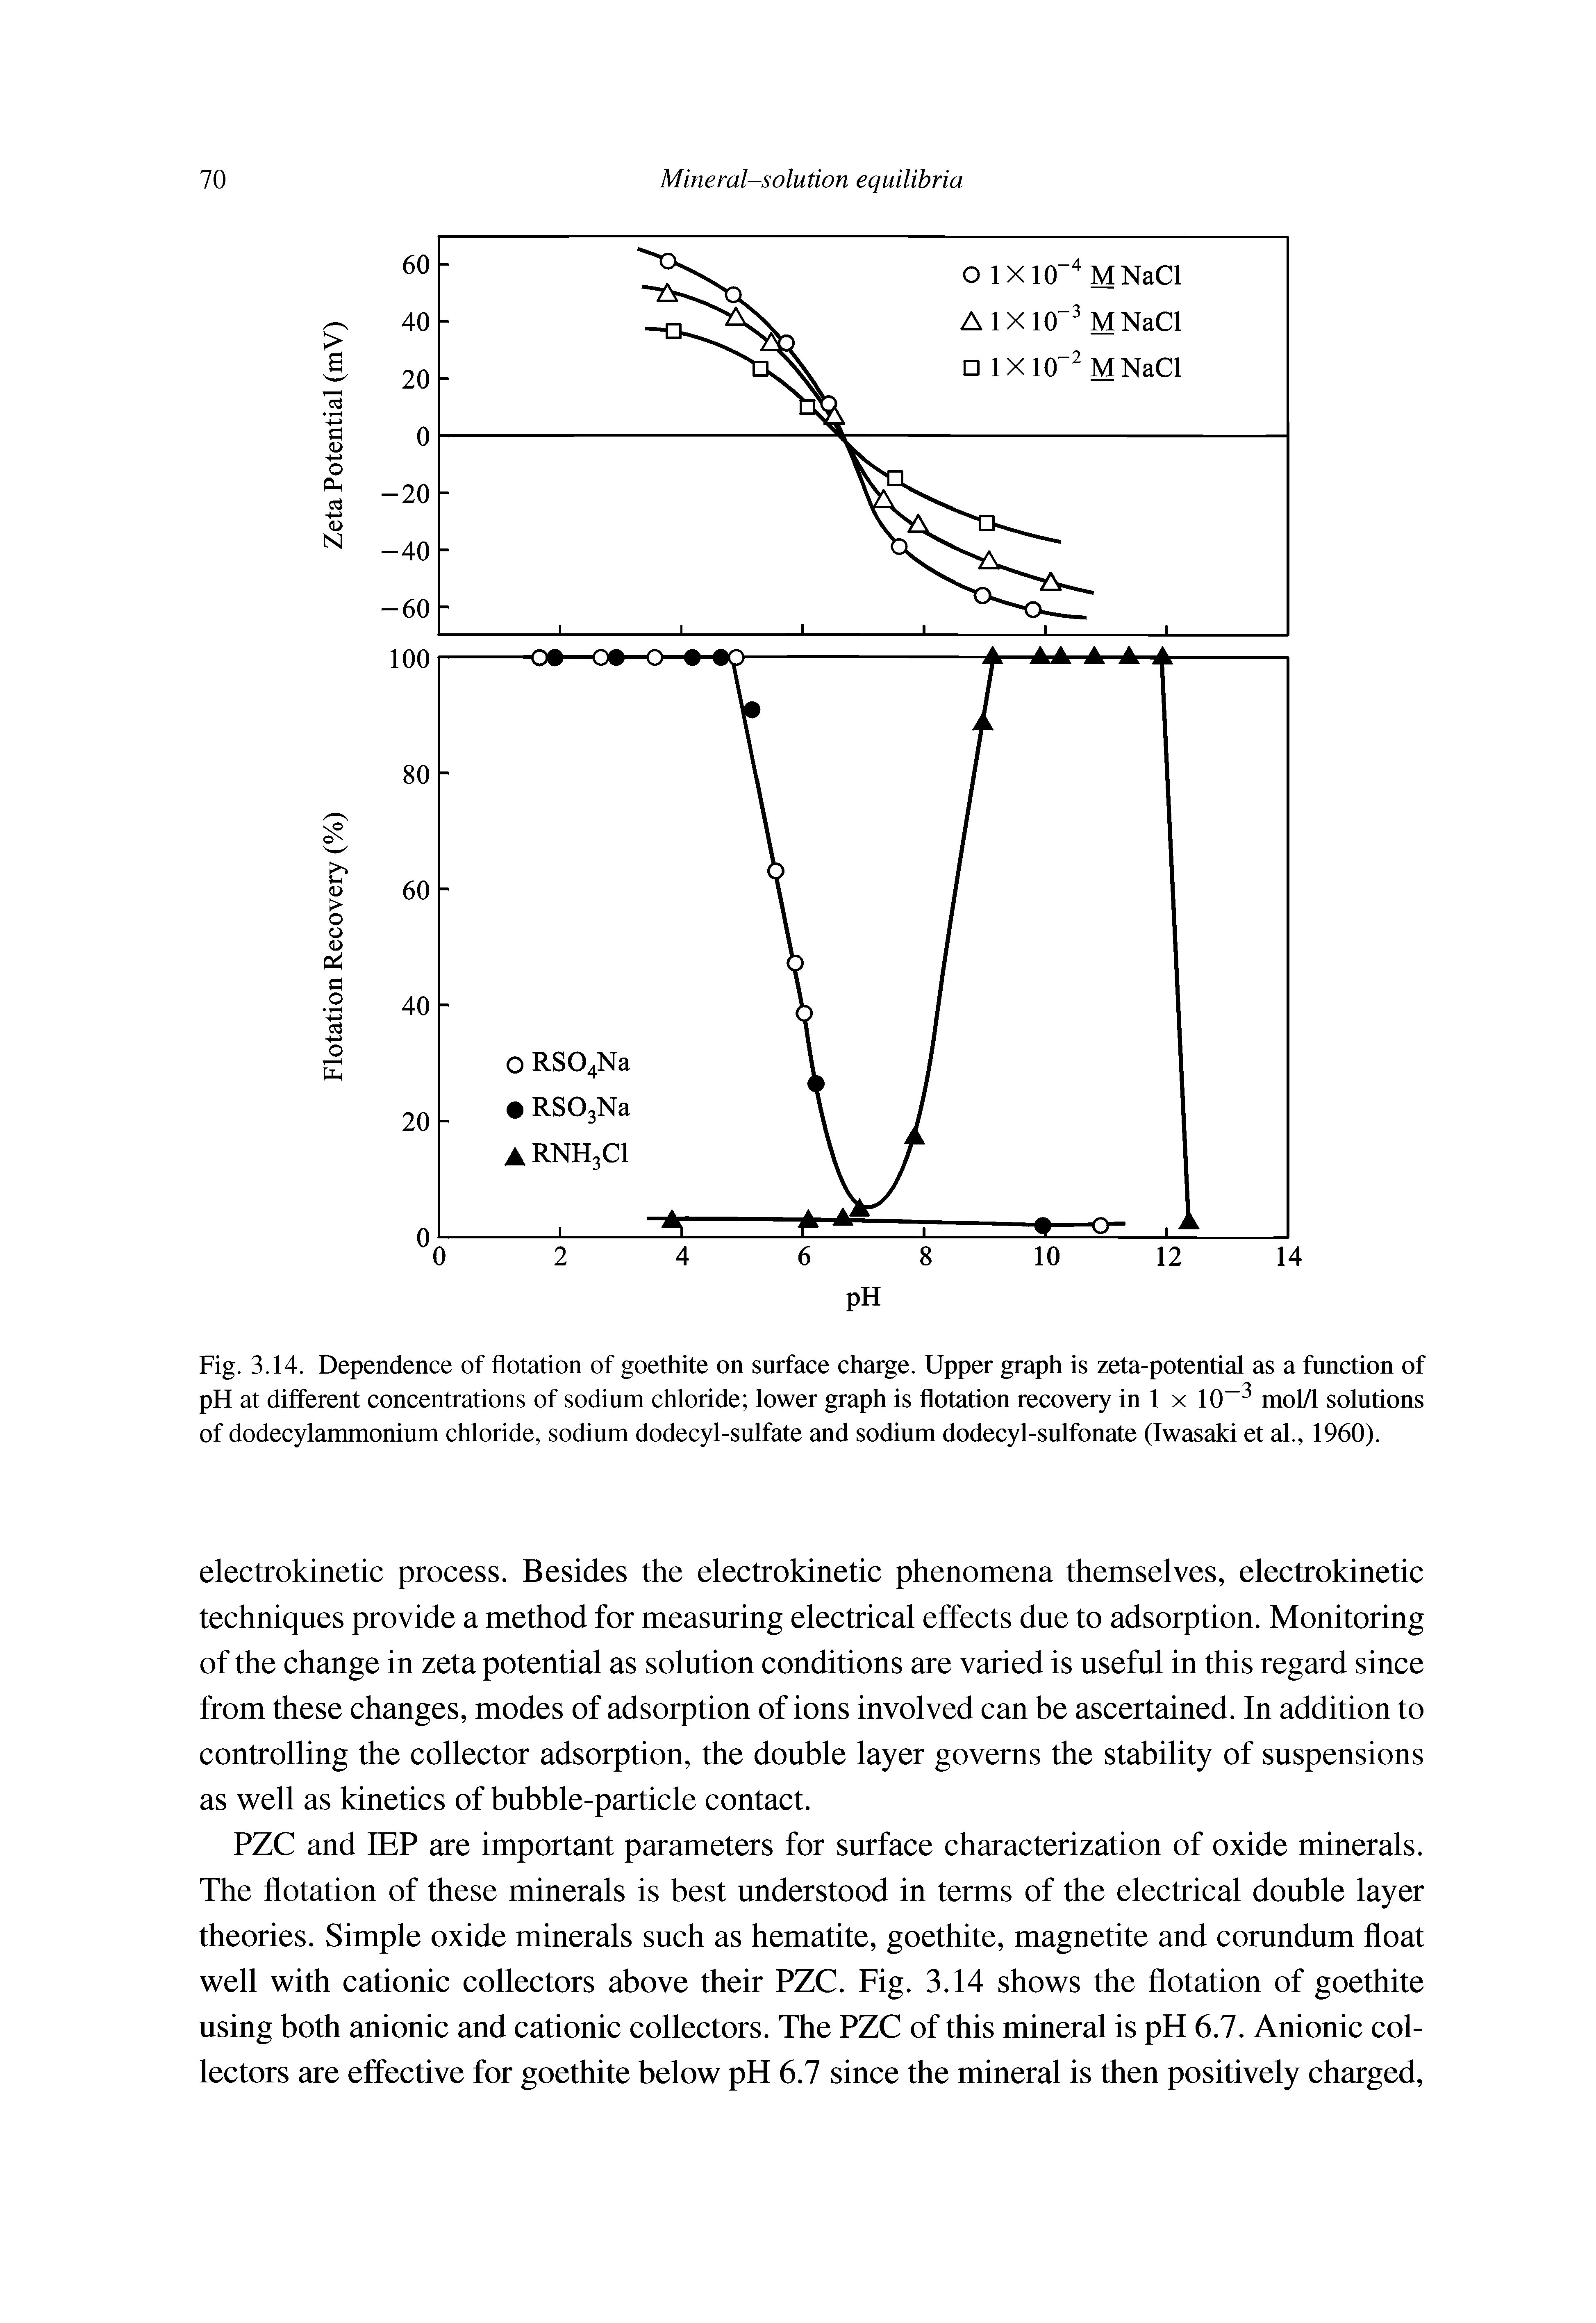 Fig. 3.14. Dependence of flotation of goethite on surface charge. Upper graph is zeta-potential as a function of pH at different concentrations of sodium chloride lower graph is flotation recovery in 1 x 10 mol/1 solutions of dodecylammonium chloride, sodium dodecyl-sulfate and sodium dodecyl-sulfonate (Iwasaki et al., 1960).